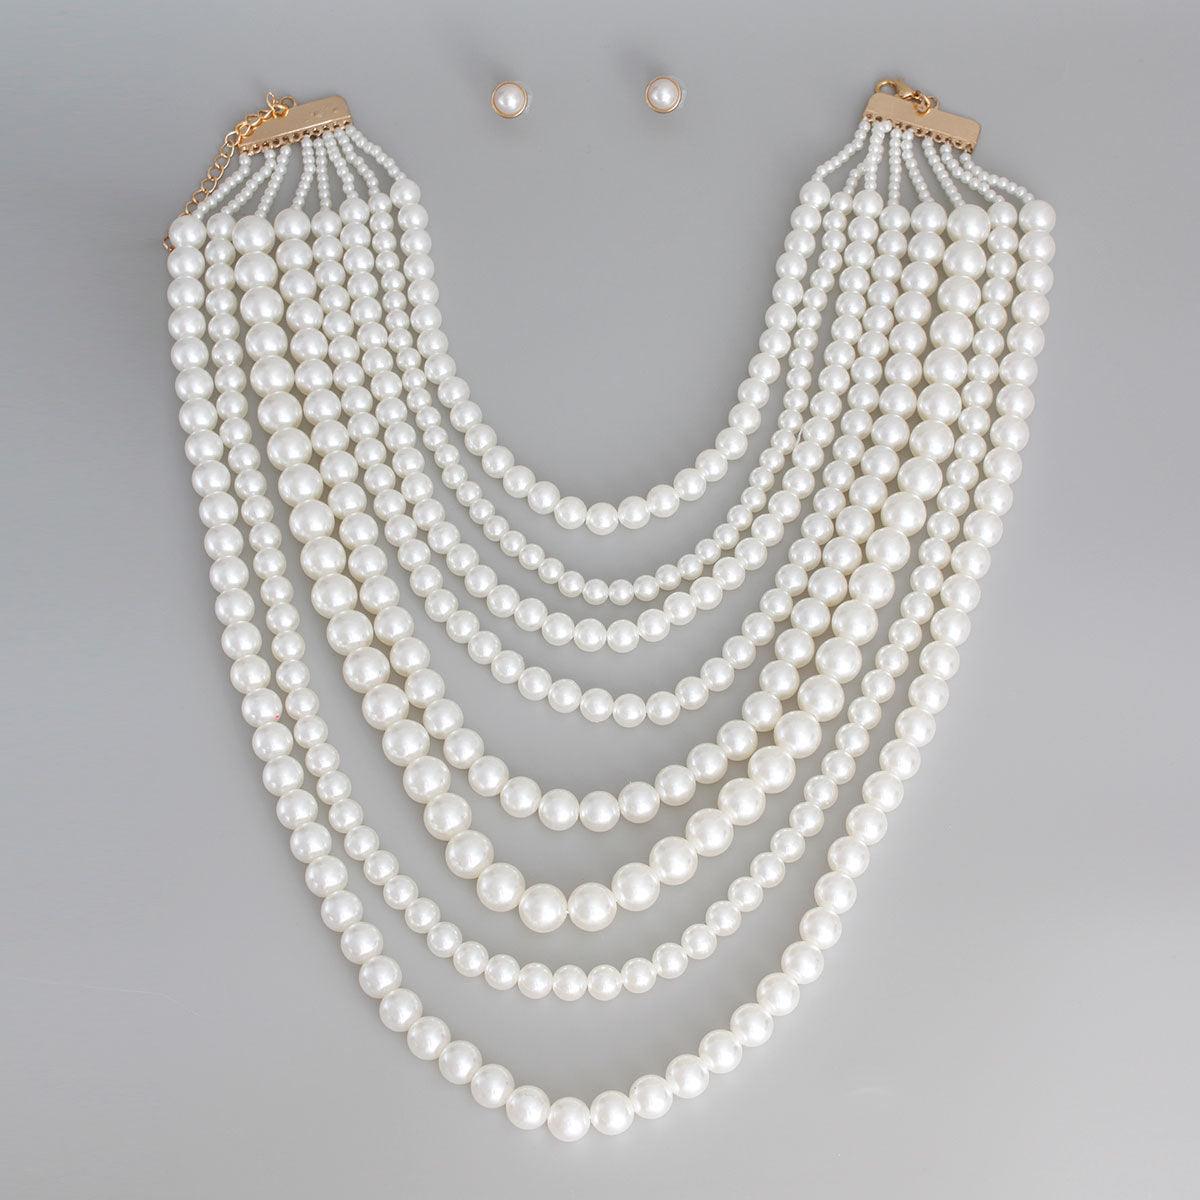 Fashion Jewelry: Multi-strand Pearl Necklace - A Timeless Statement Piece